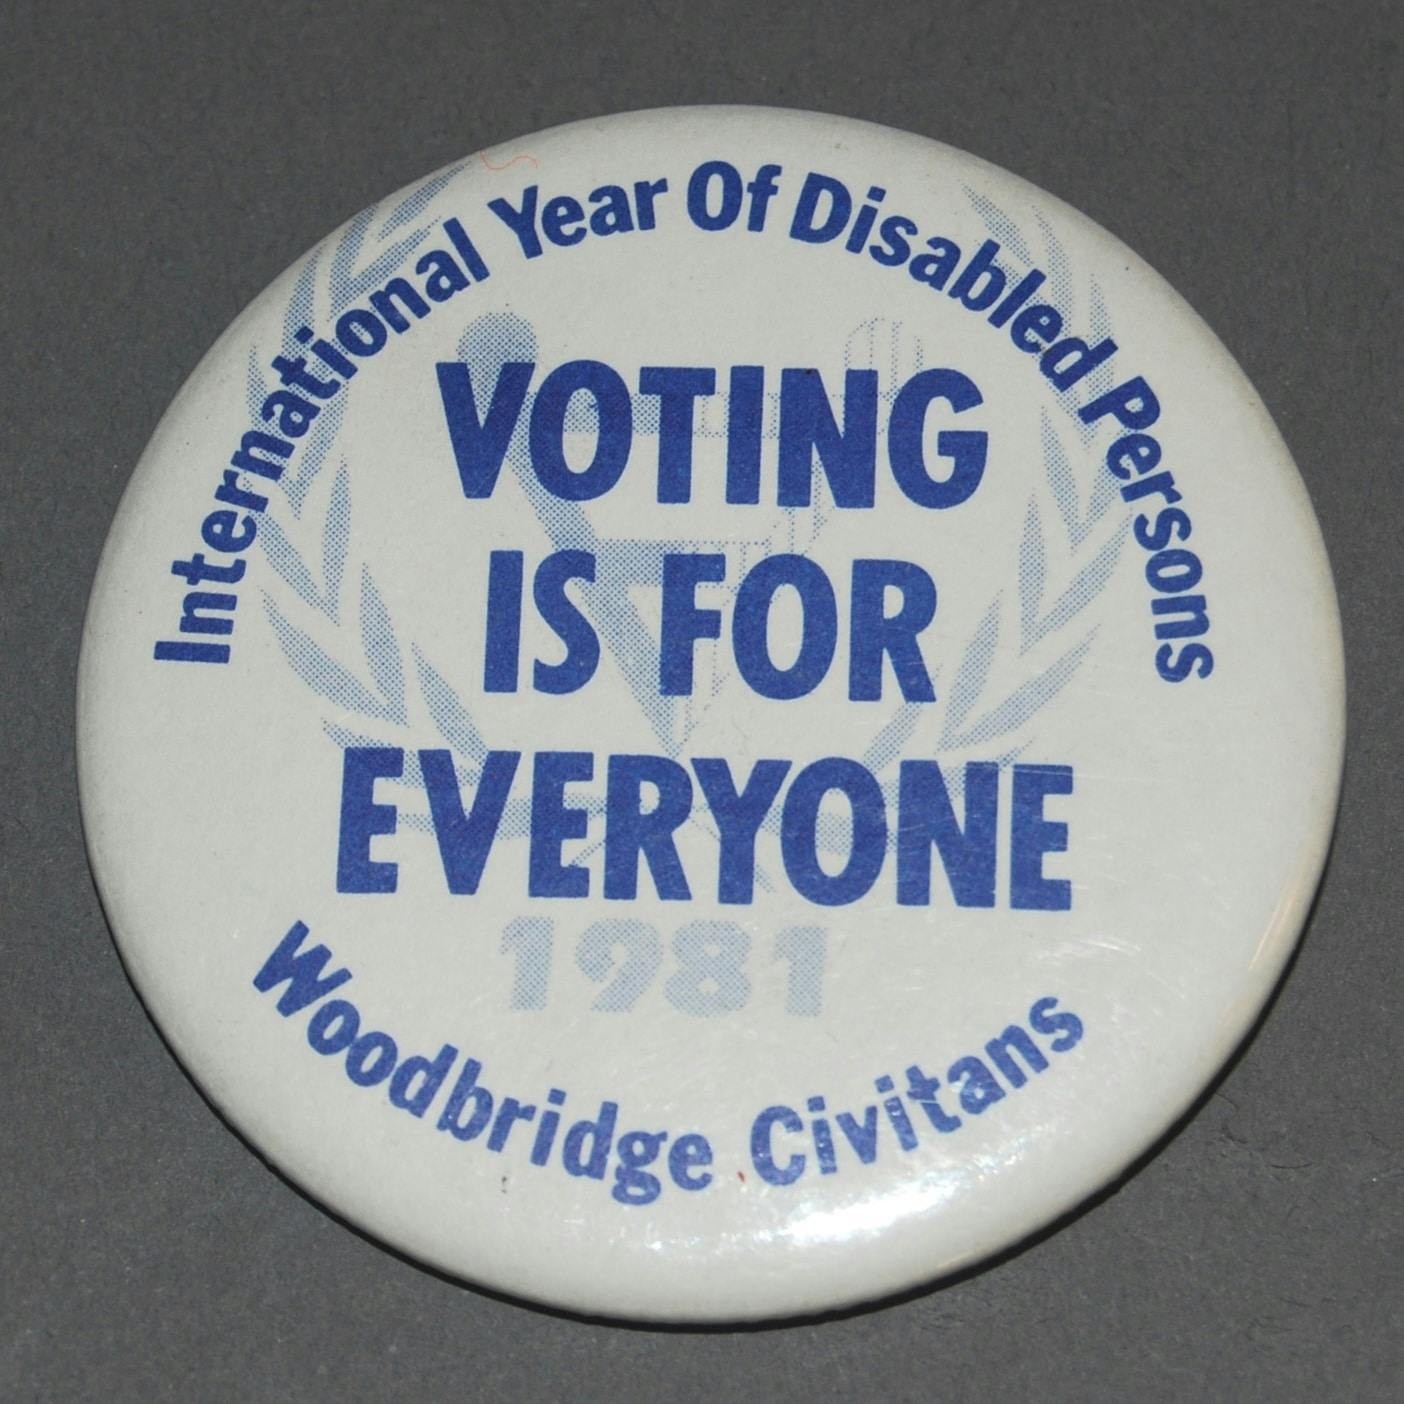 Button that reads "Voting is for Everyone. International Year of Disabled Persons. Woodbridge Civitans"